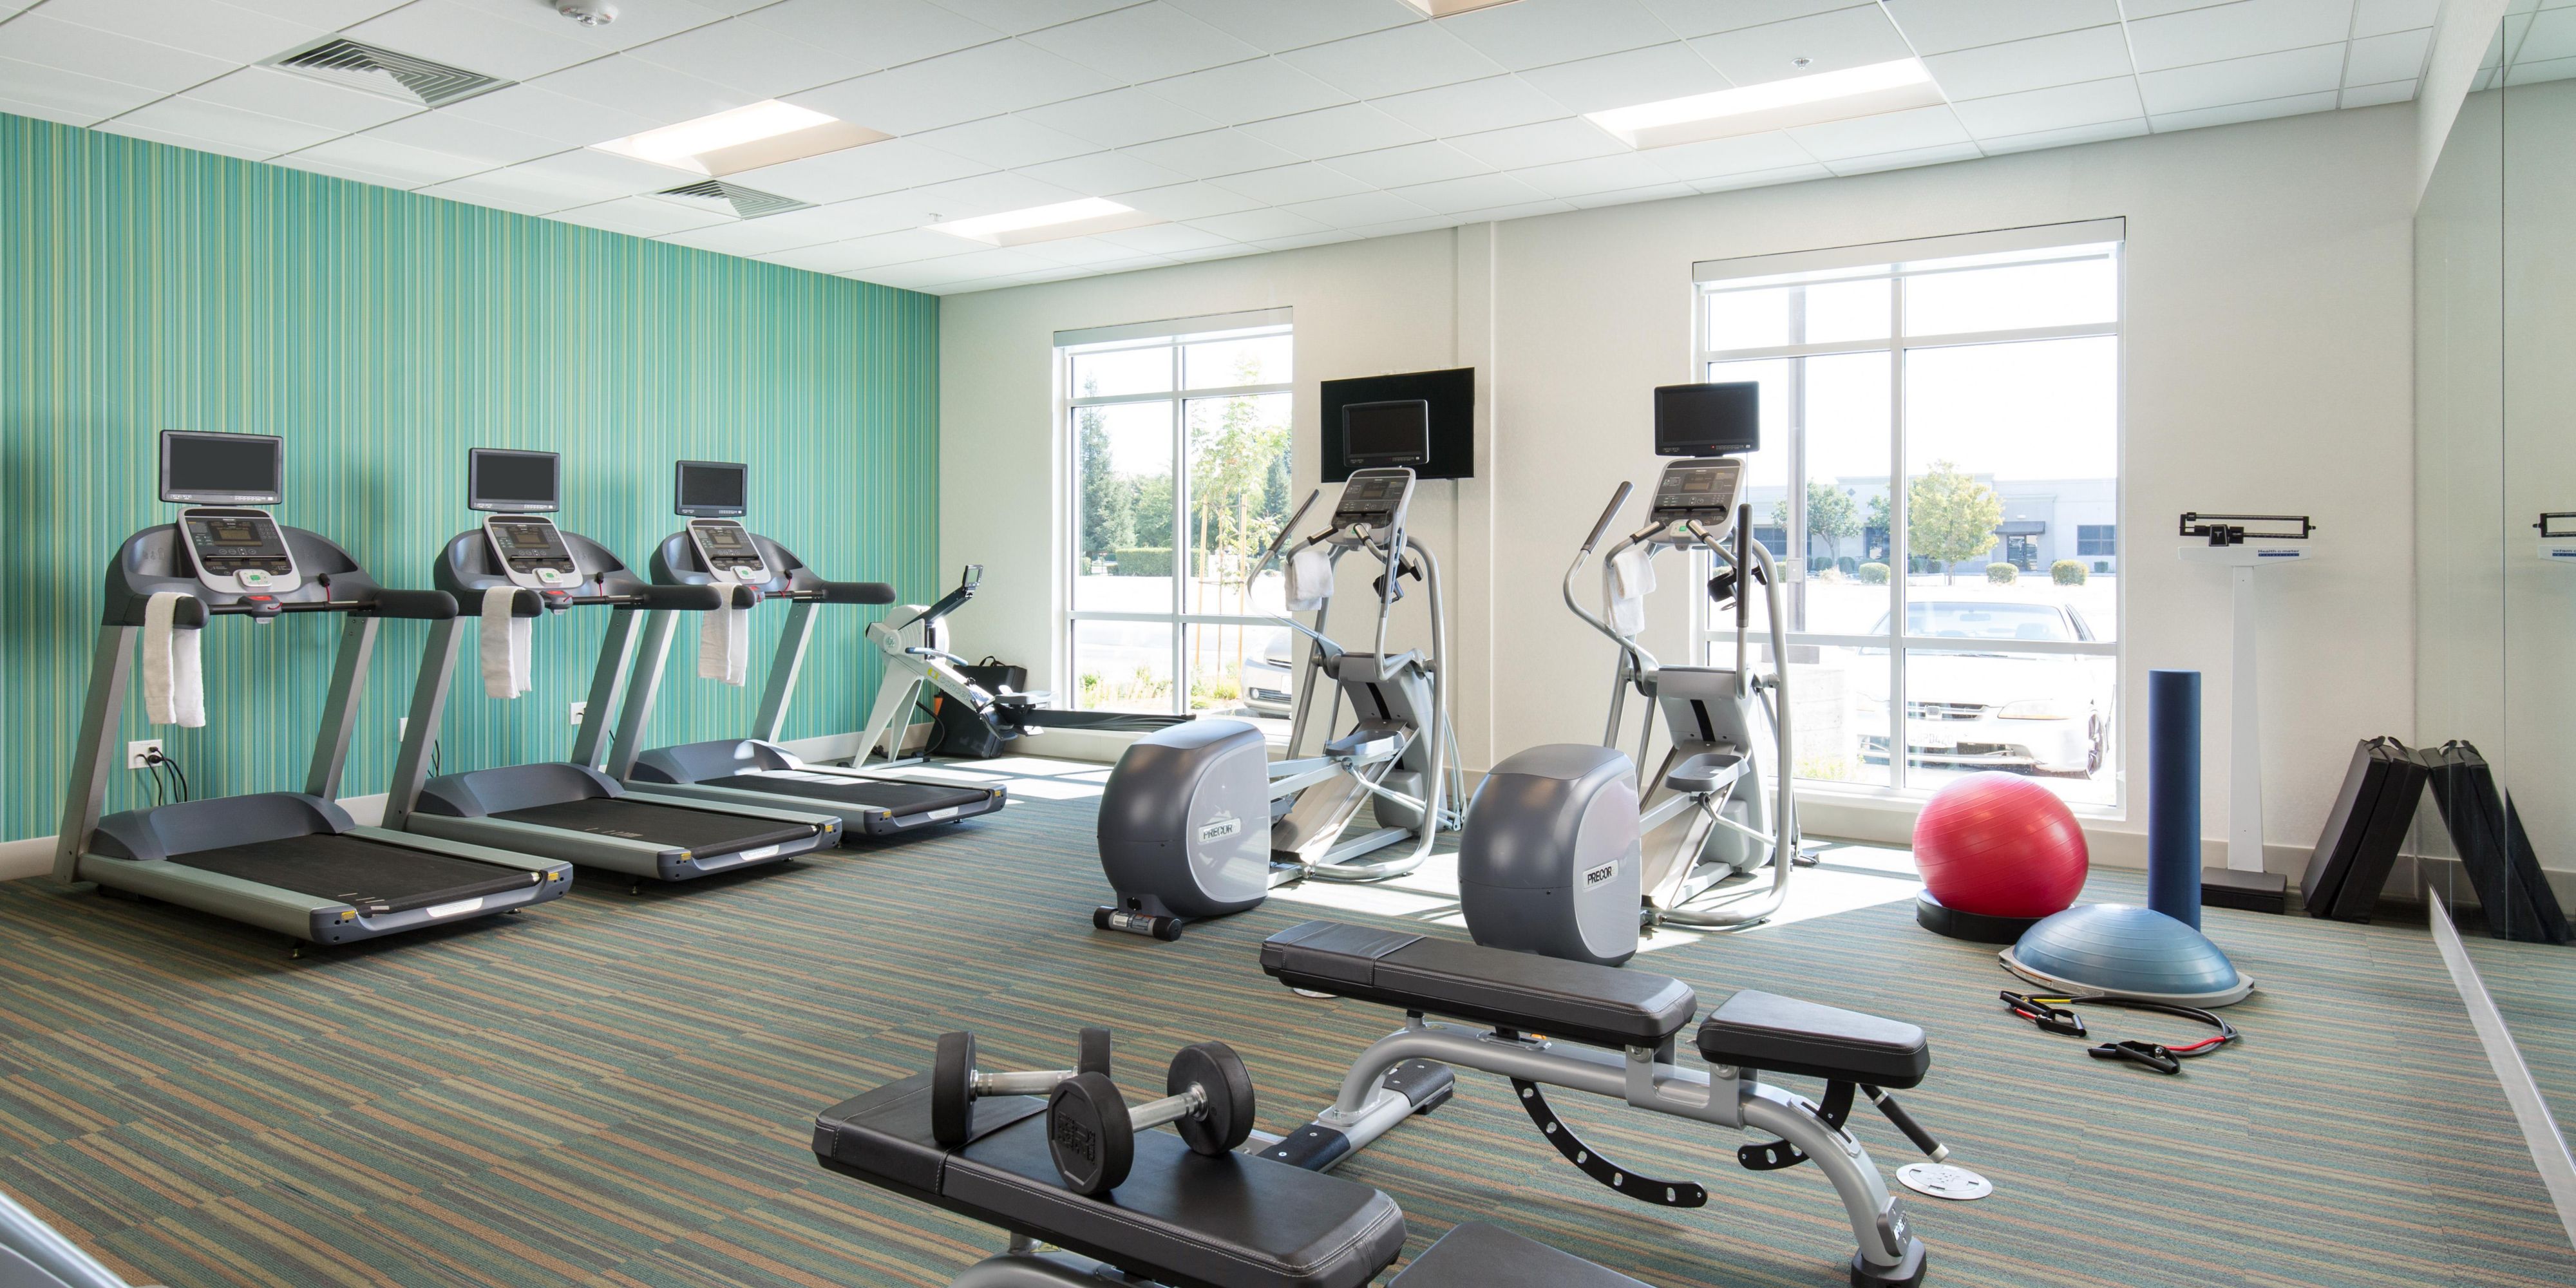 Turbocharge your energy in our modern fitness center with state-of-the-art strength training equipment, yoga balls, and cardio machines.